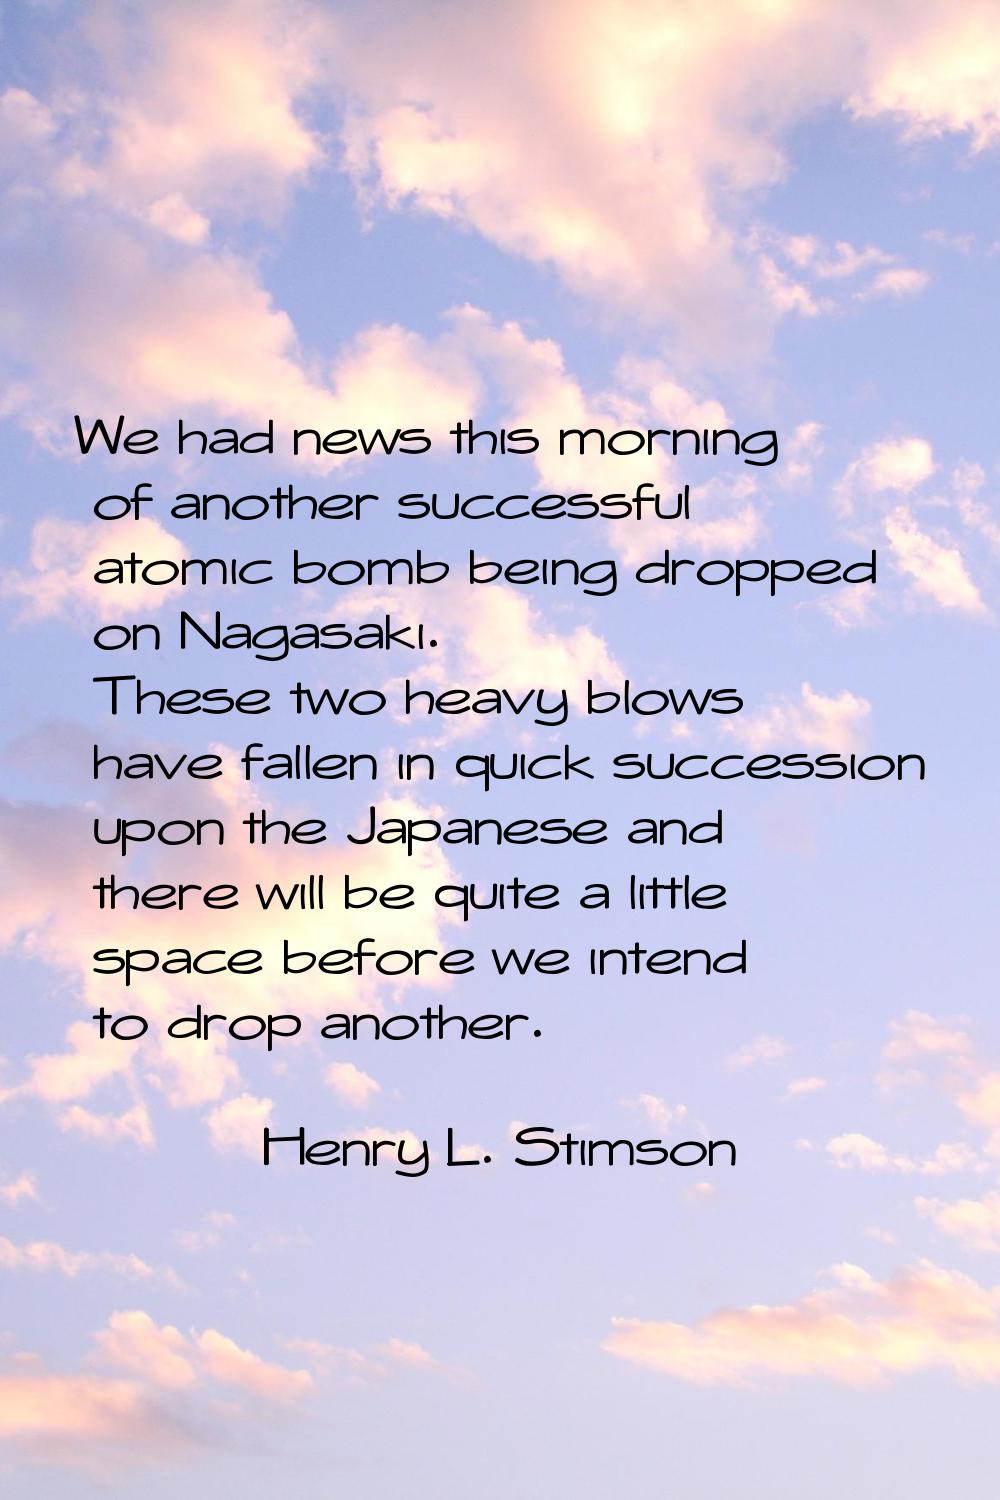 We had news this morning of another successful atomic bomb being dropped on Nagasaki. These two hea